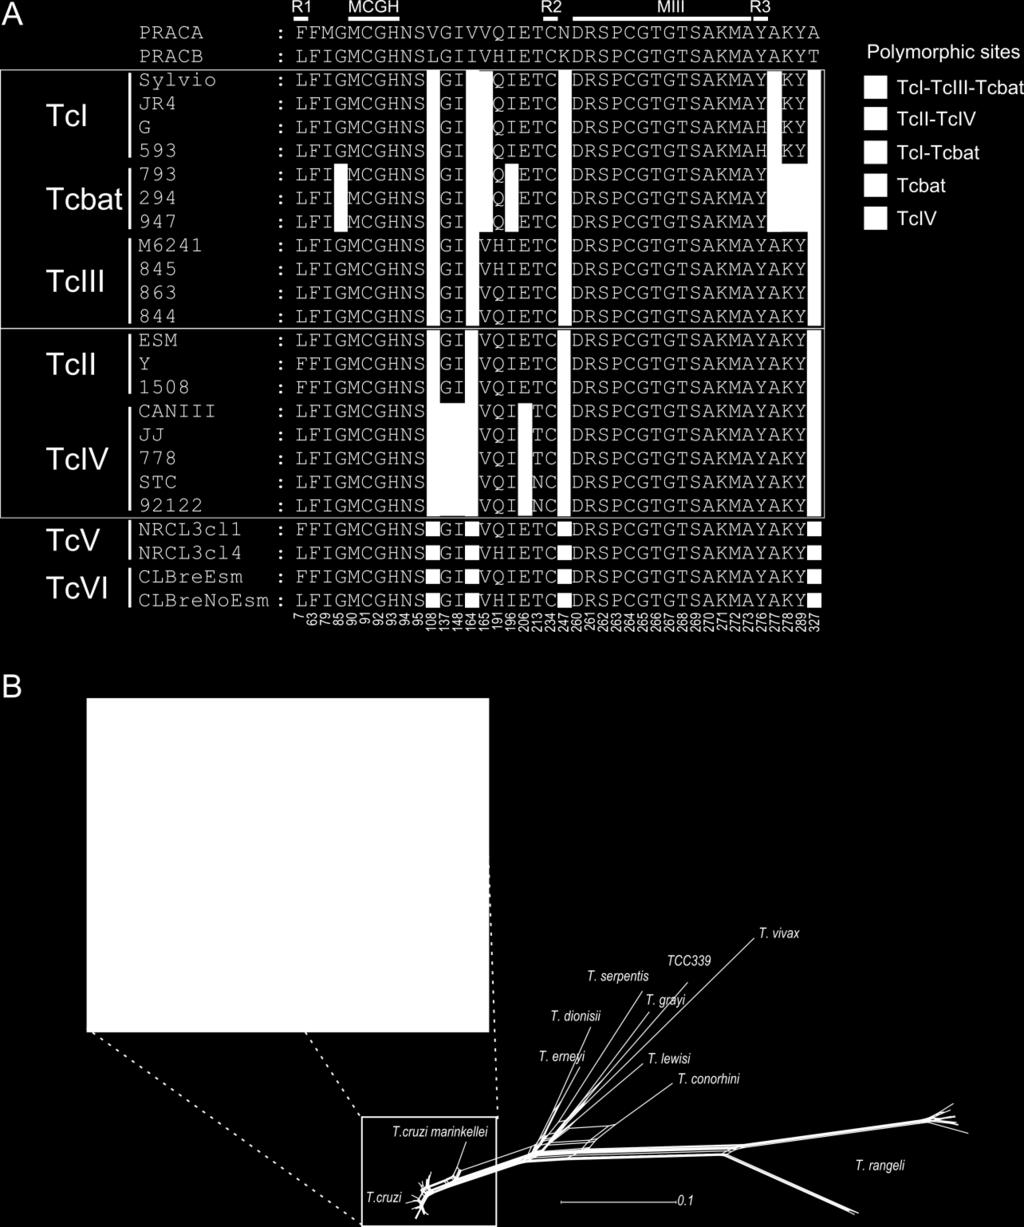 TcPRACA and TcPRACB = major isoforms of T. cruzi (B). Network genealogy of TcPRAC amino-acid sequences from T.